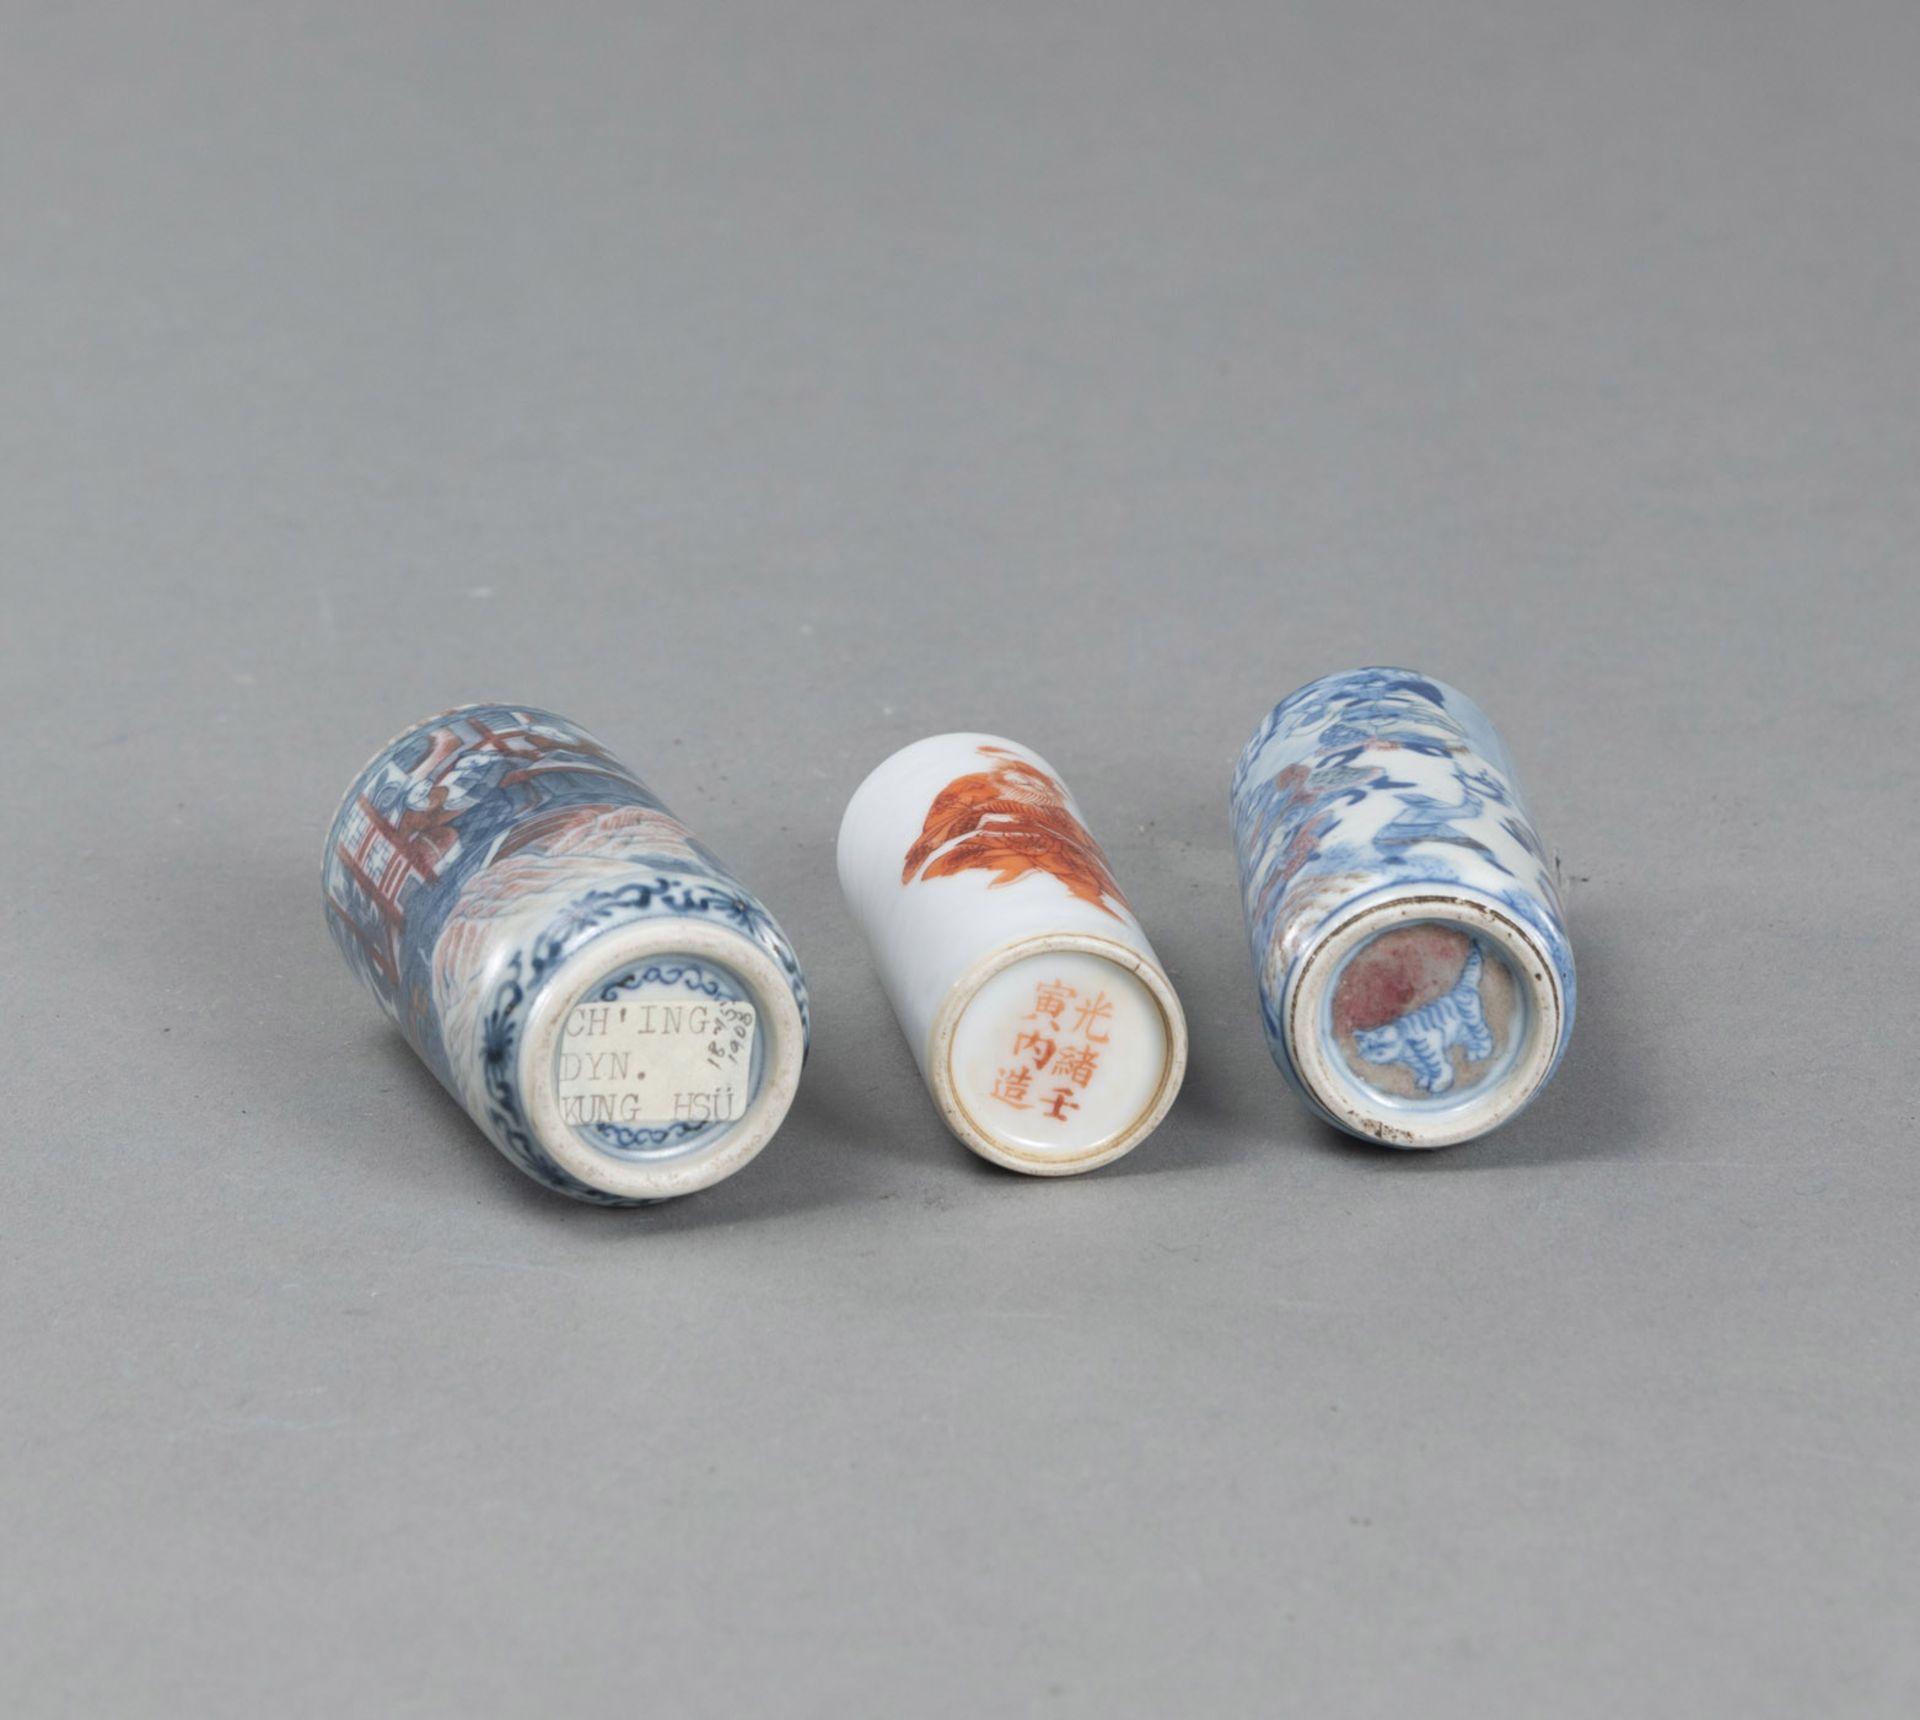 THREE UNDERGLAZE-BLUE AND IRON-RED DECORATED PORCELAIN SNUFFBOTTLES - Image 3 of 3